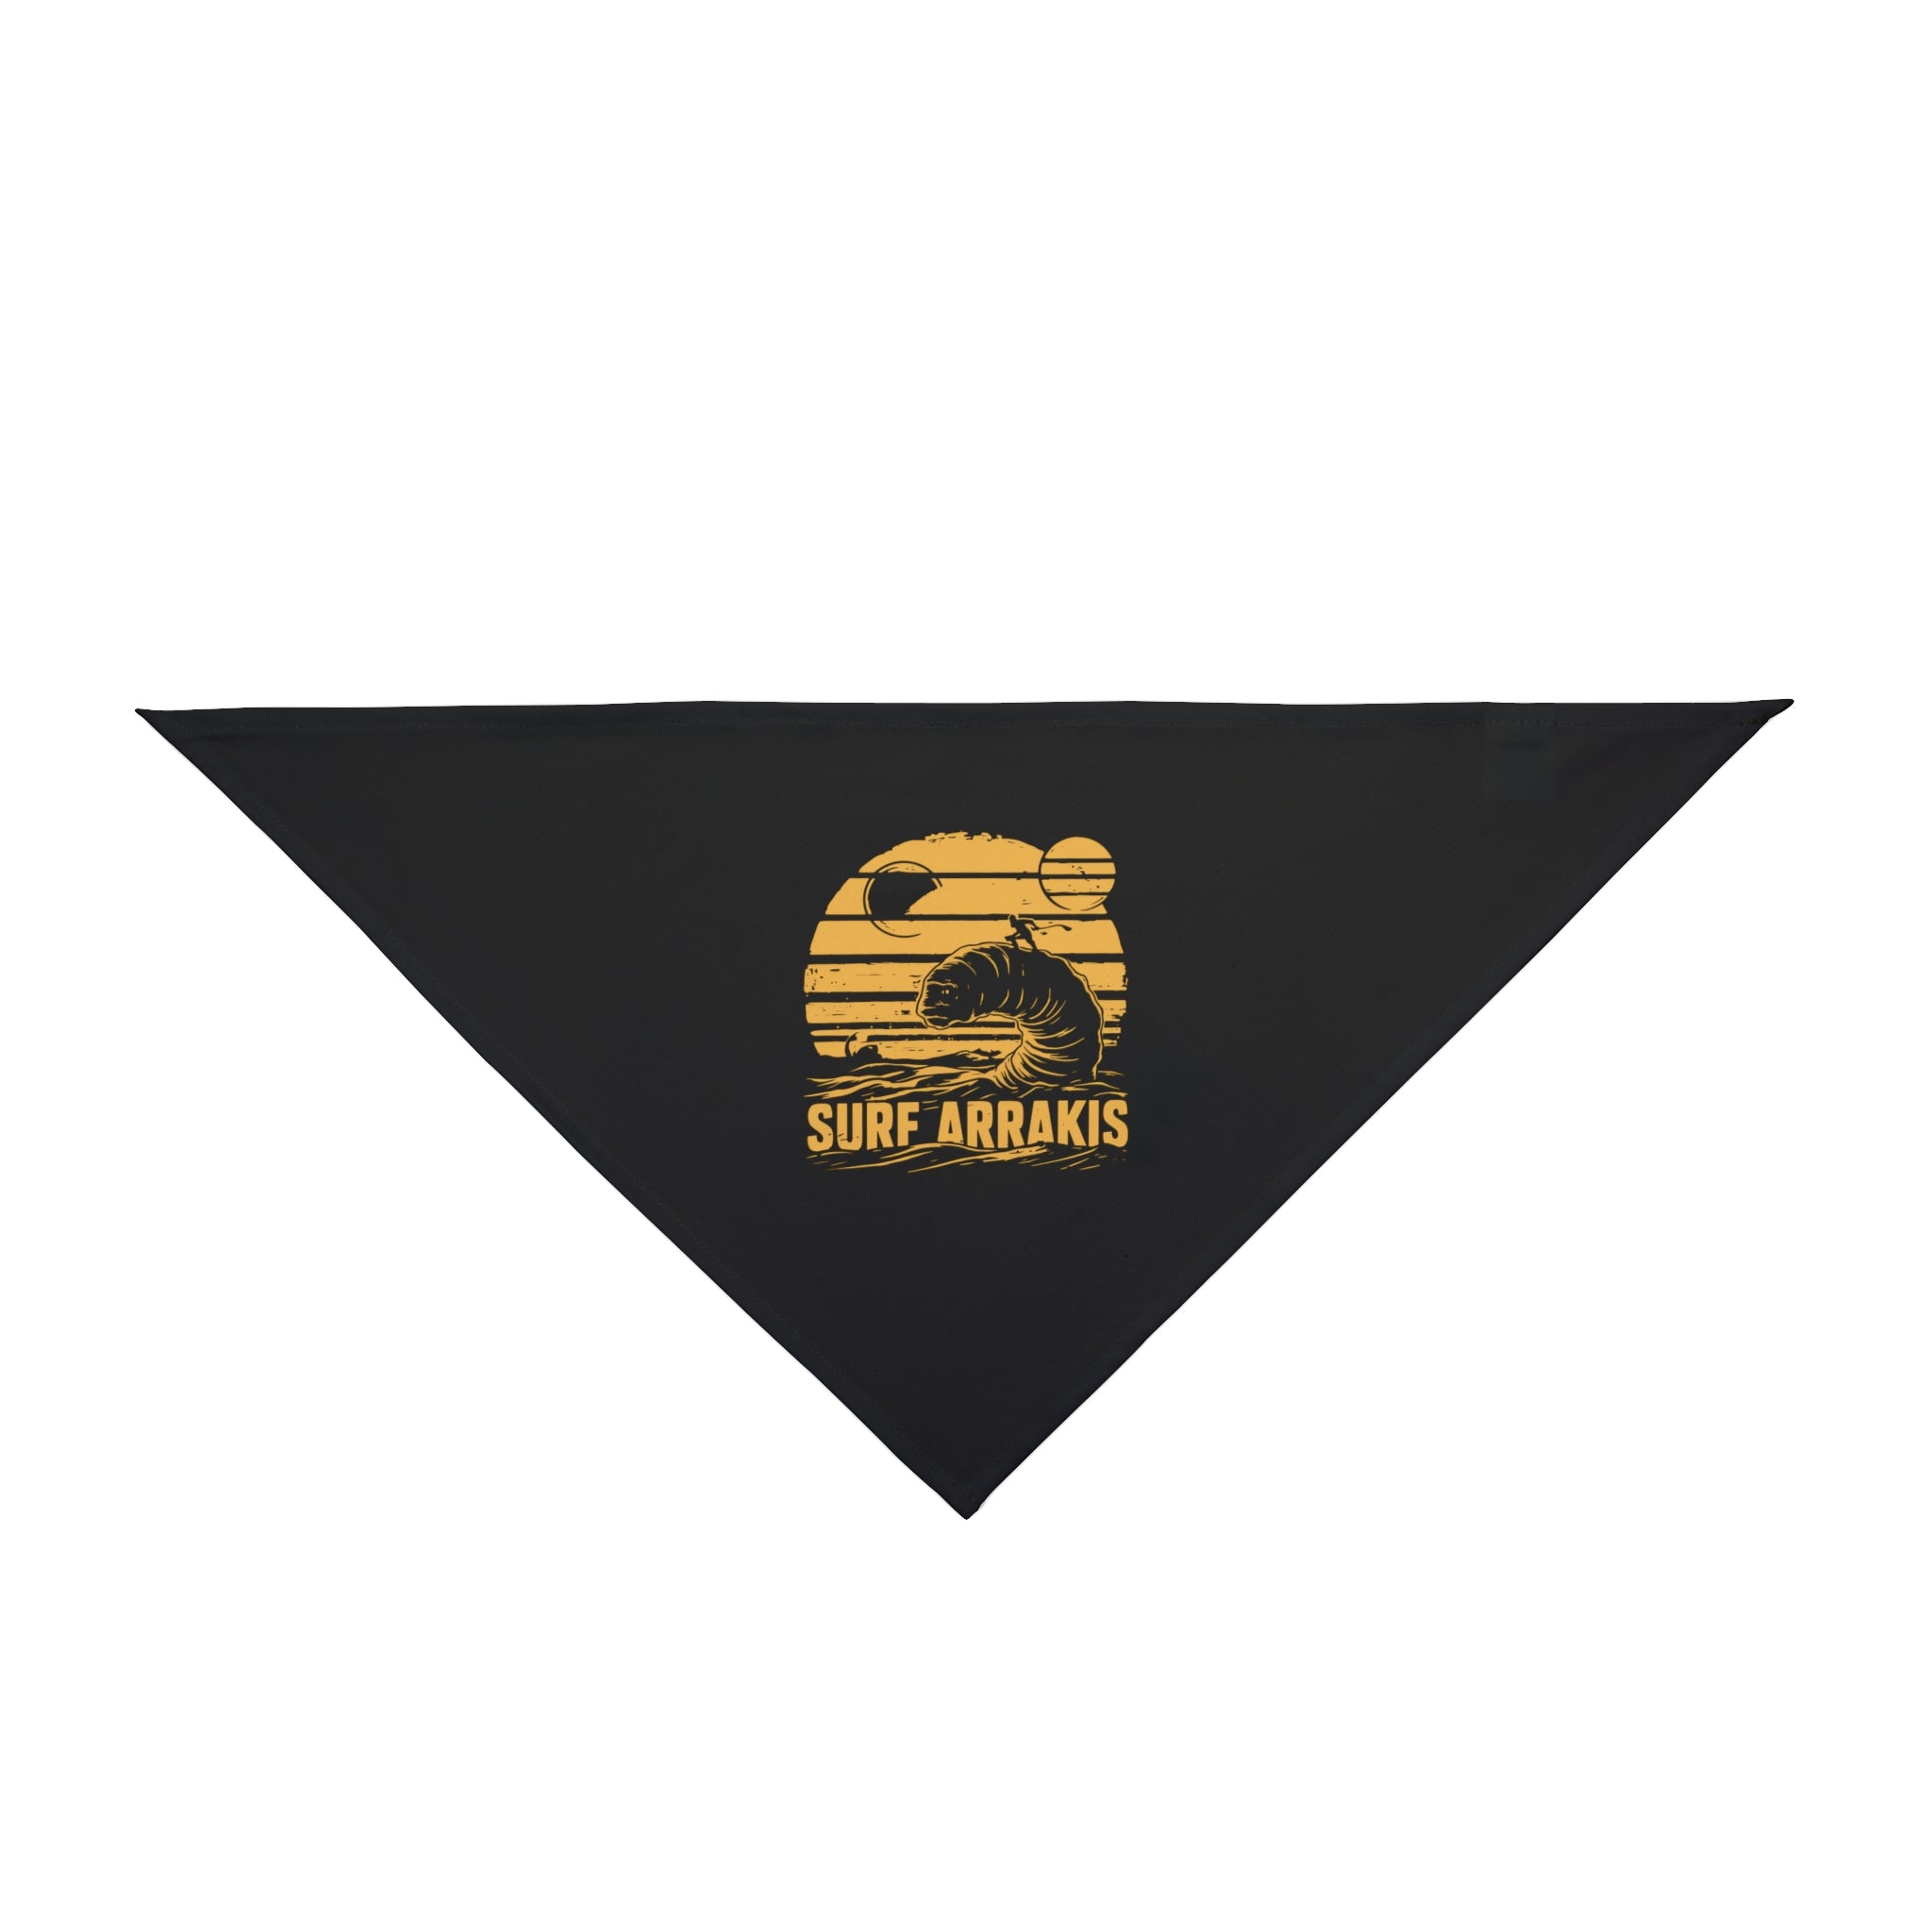 Introducing the Surf Arrakis - Pet Bandana: a black triangular cloth with a yellow graphic design of a surfer in desert-like conditions. Made from soft-spun polyester, this stylish bandana ensures both flair and pet comfort.